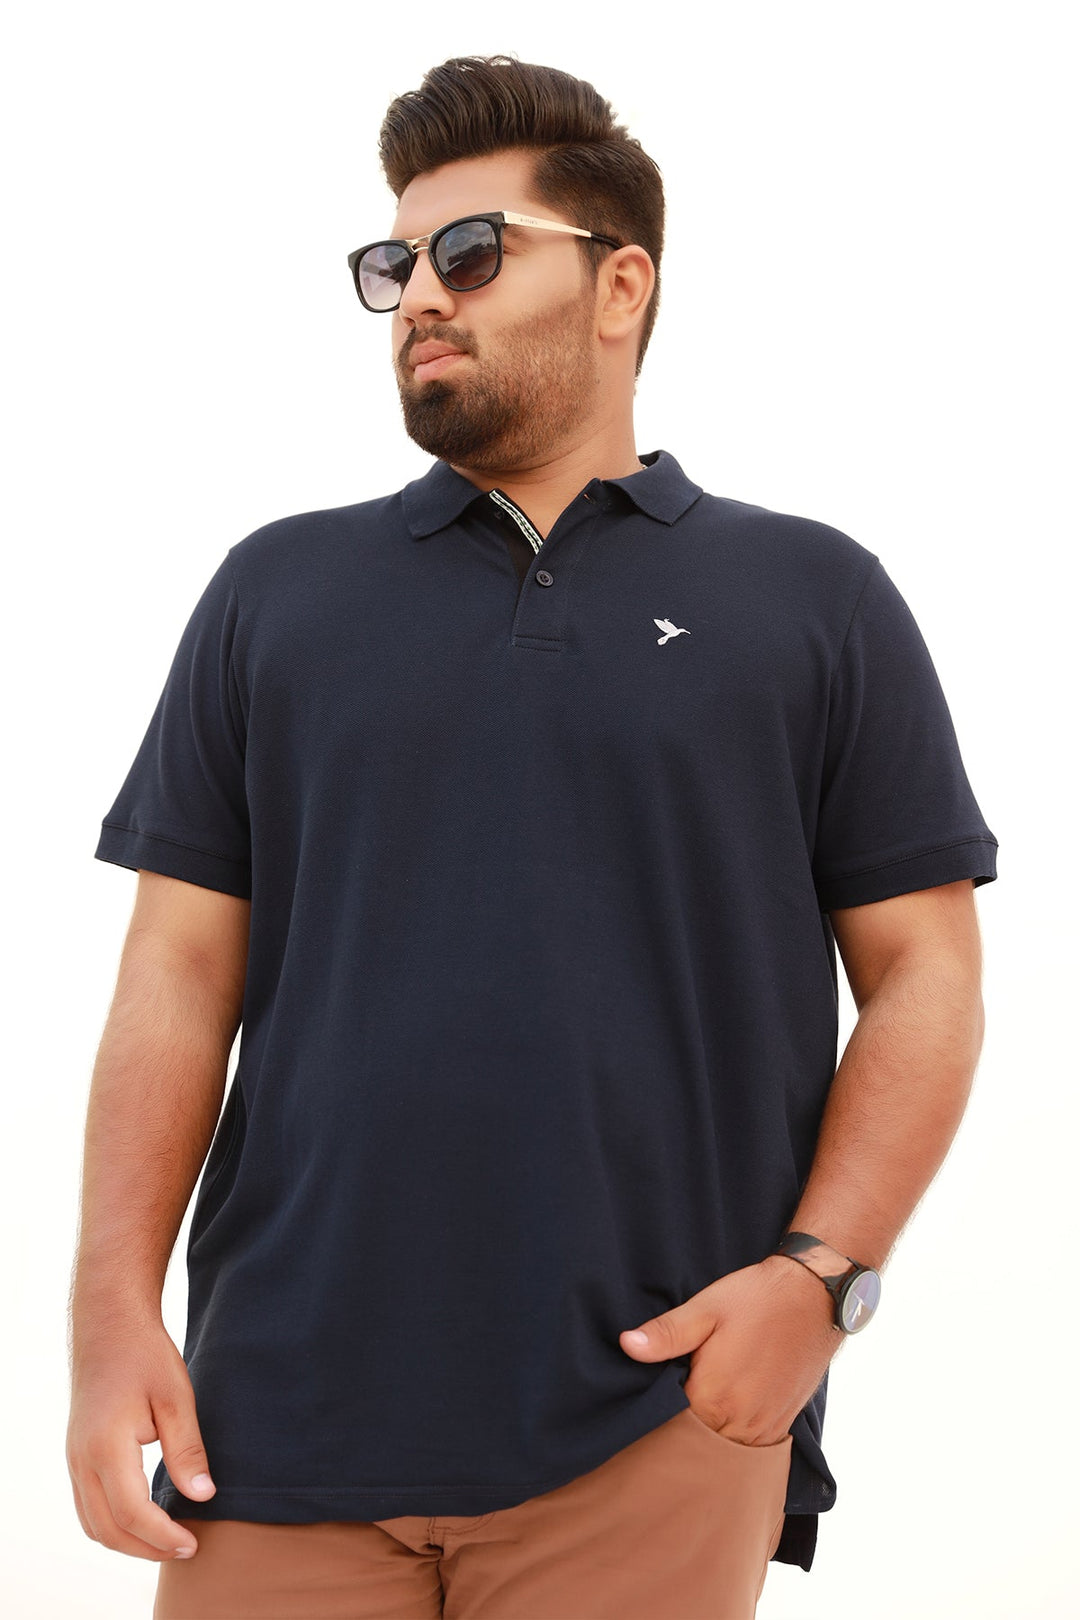 Navy Blue Embroidered Polo Shirt (Plus Size) - A23 - MP0200P